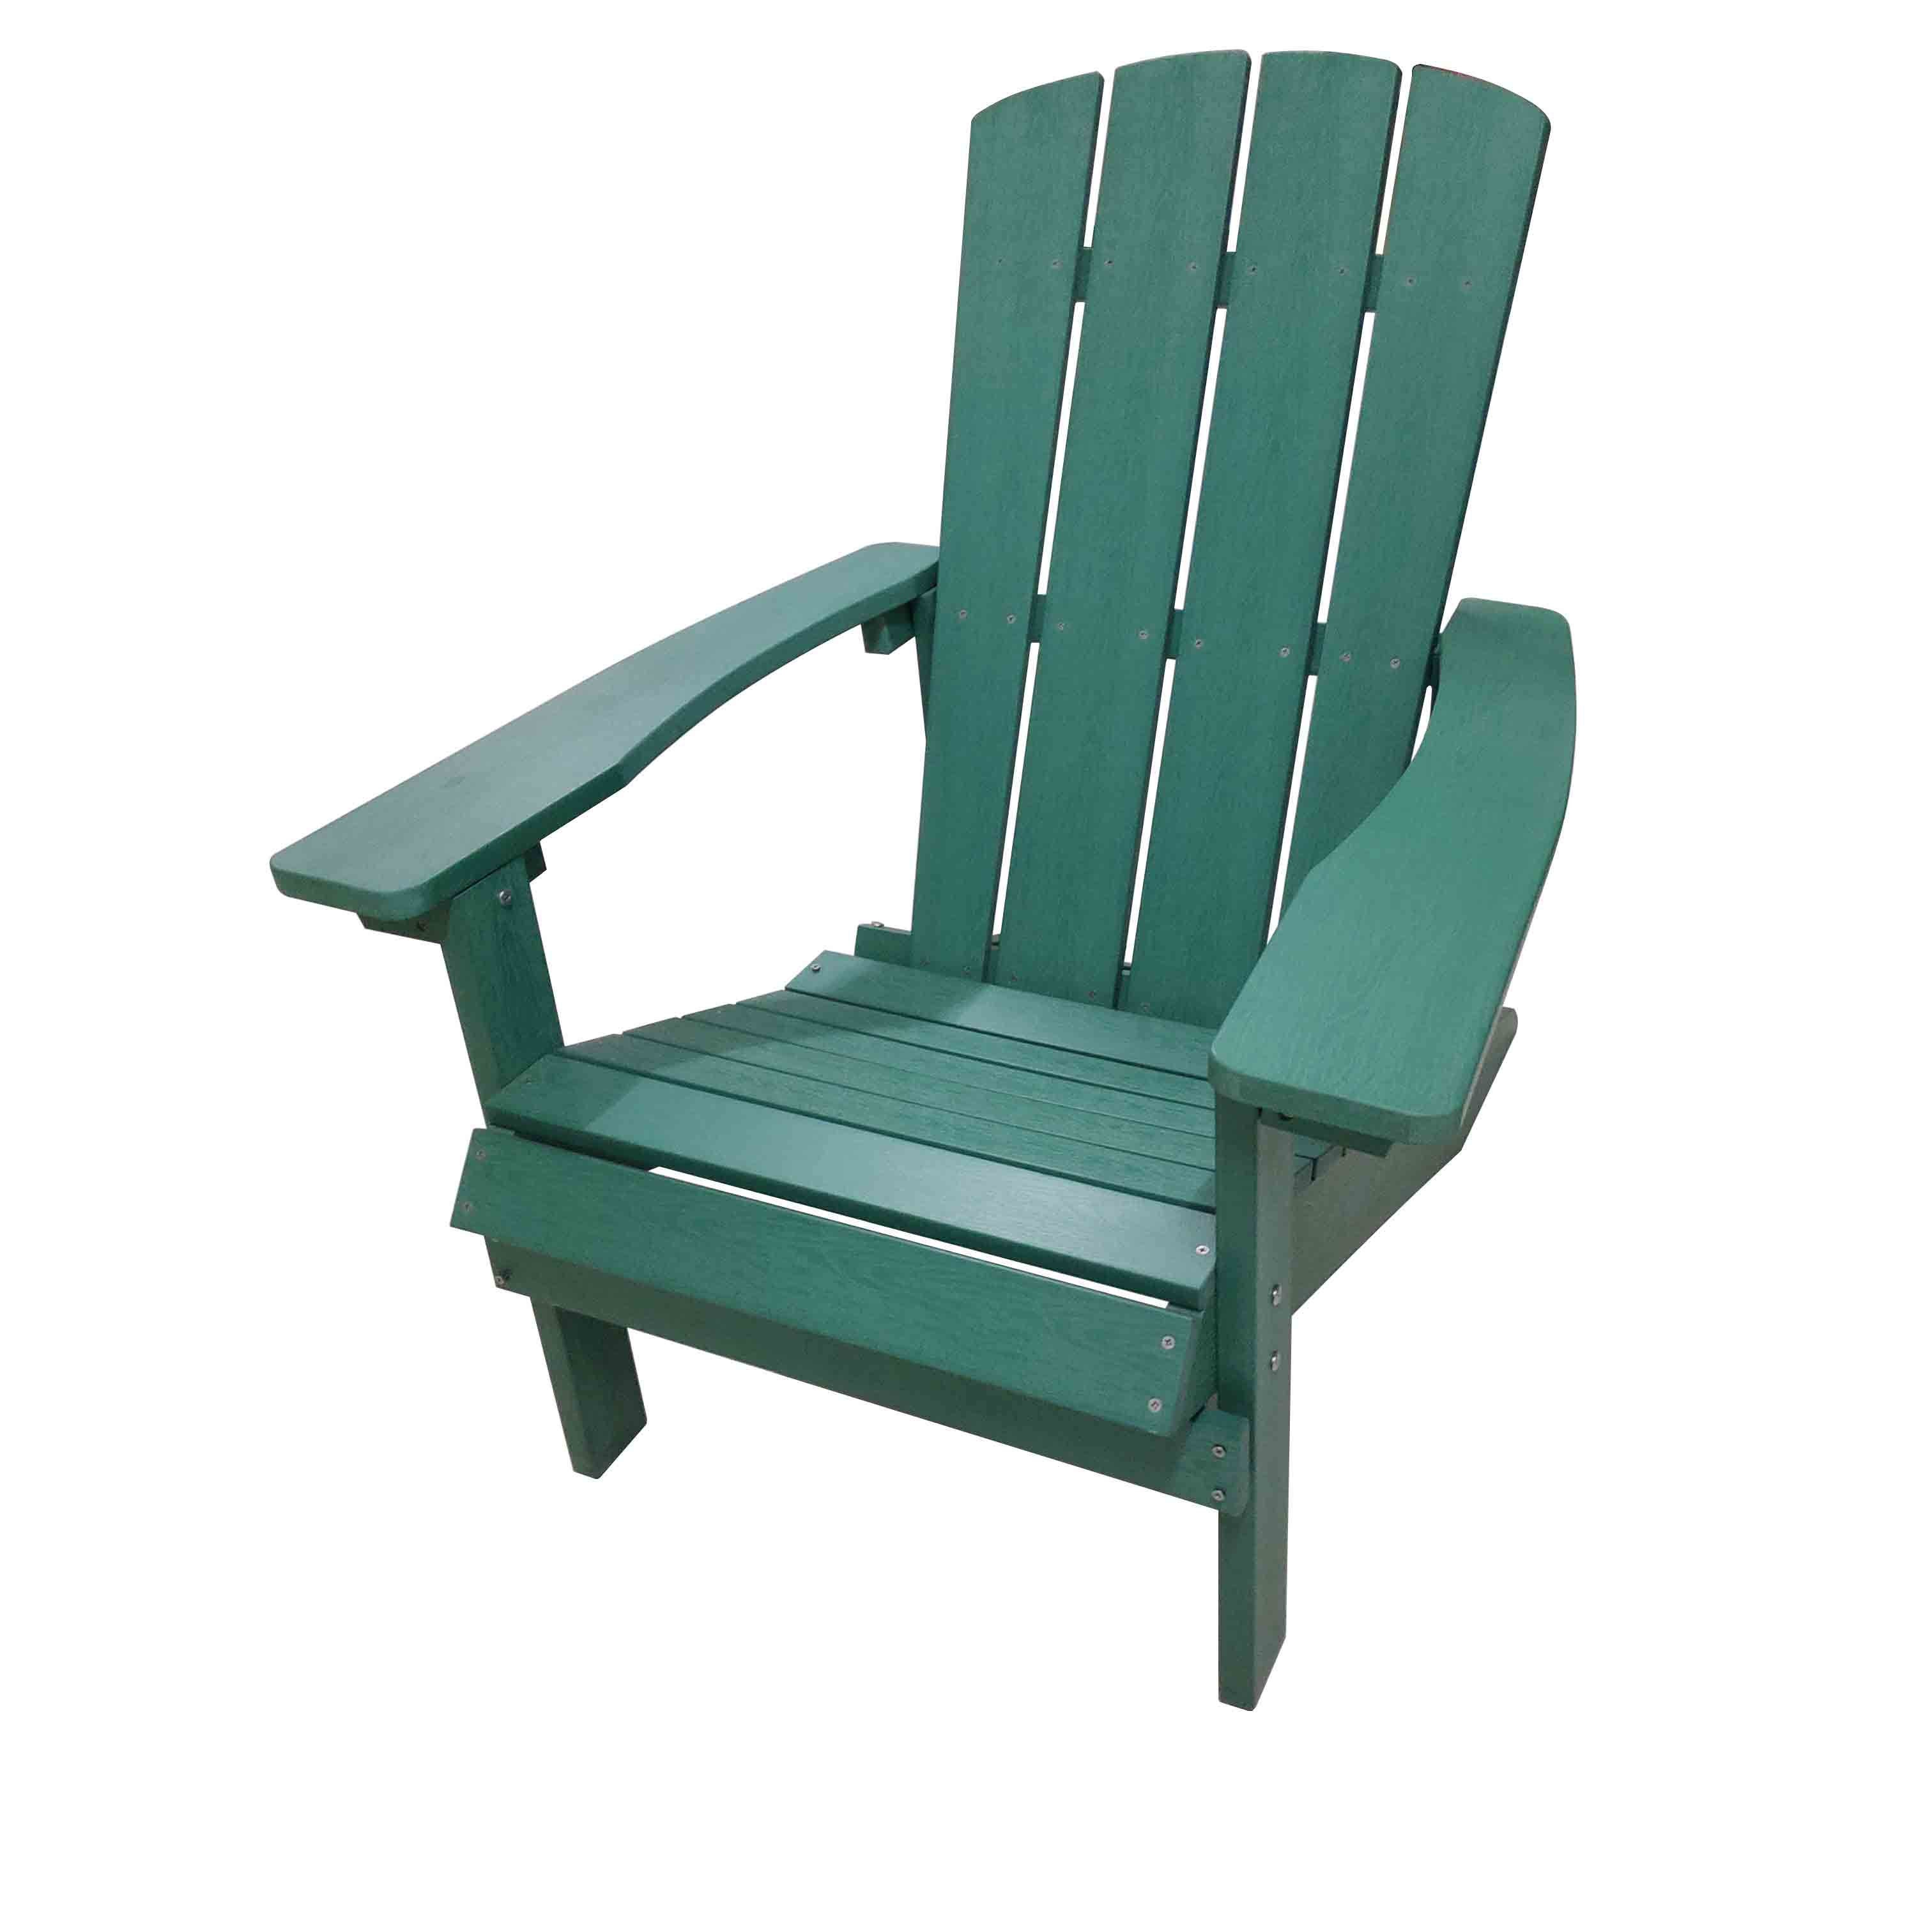 JJ-C14501-GRN-GG PS wood Adirondack chair Featured Image